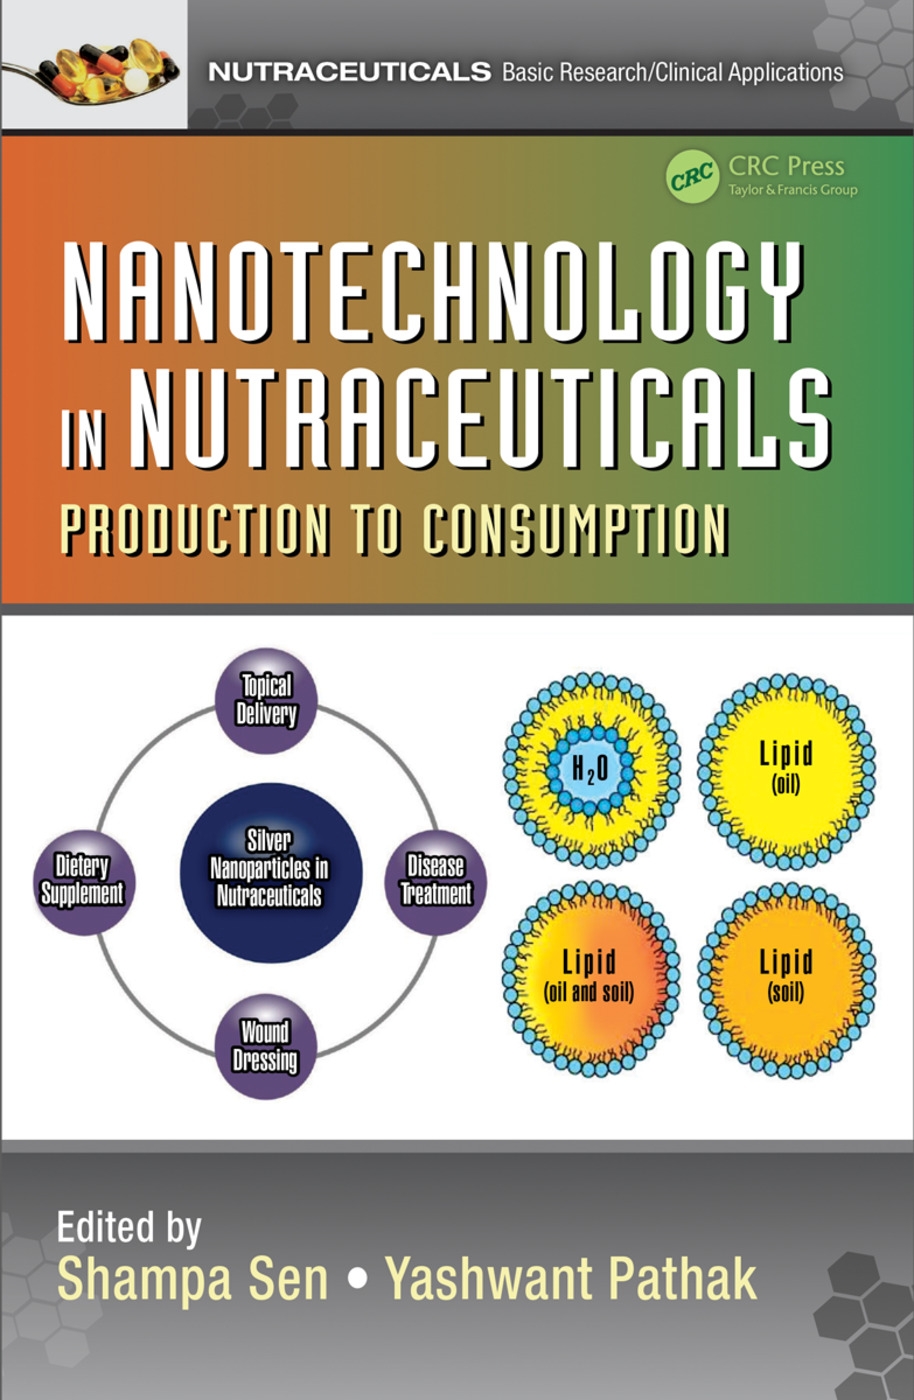 Nanotechnology in Nutraceuticals: Production to Consumption